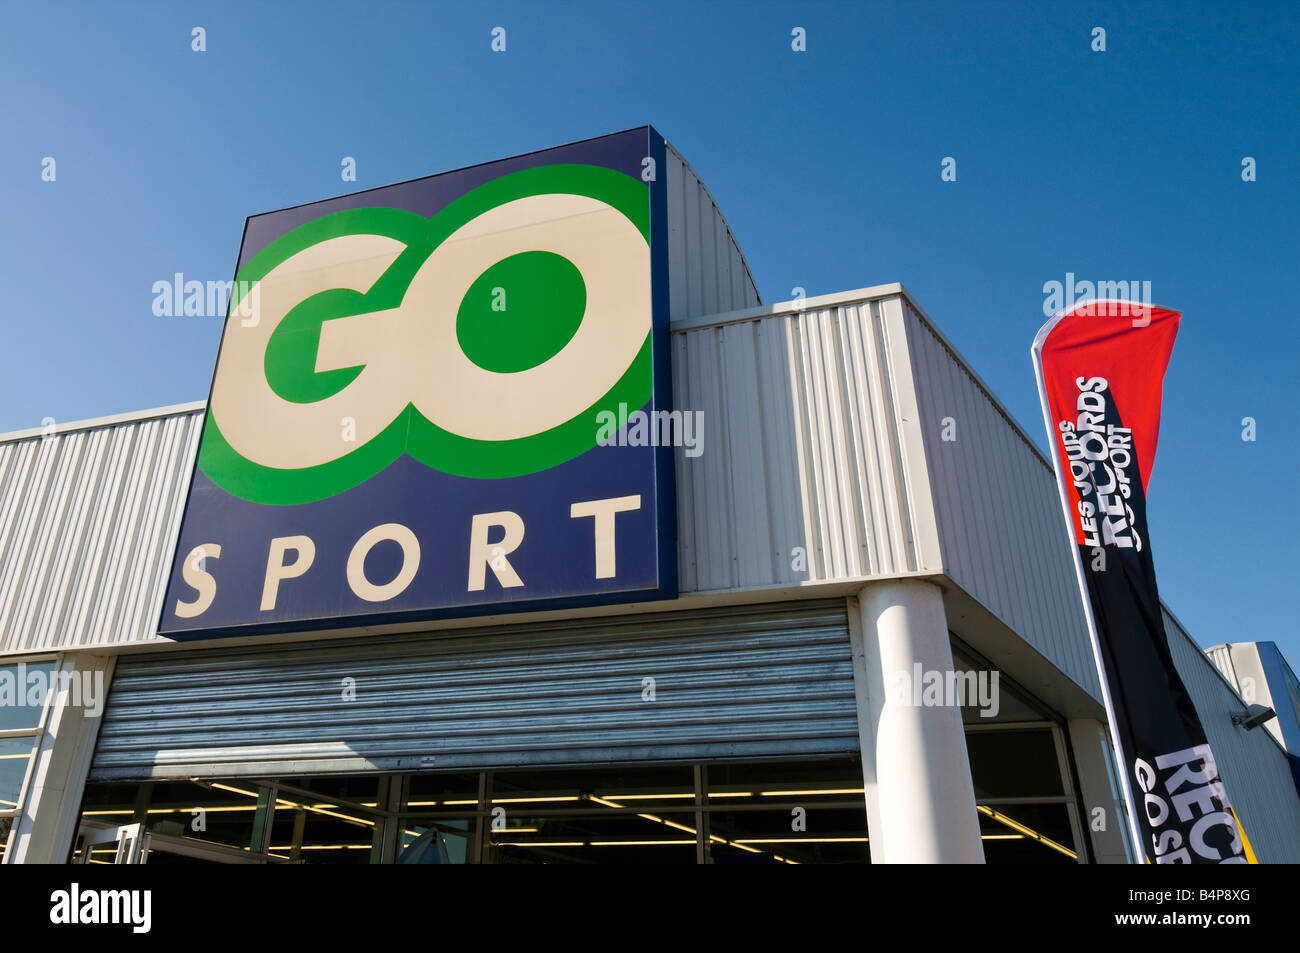 Go Sport - sporting goods stores in Poland 